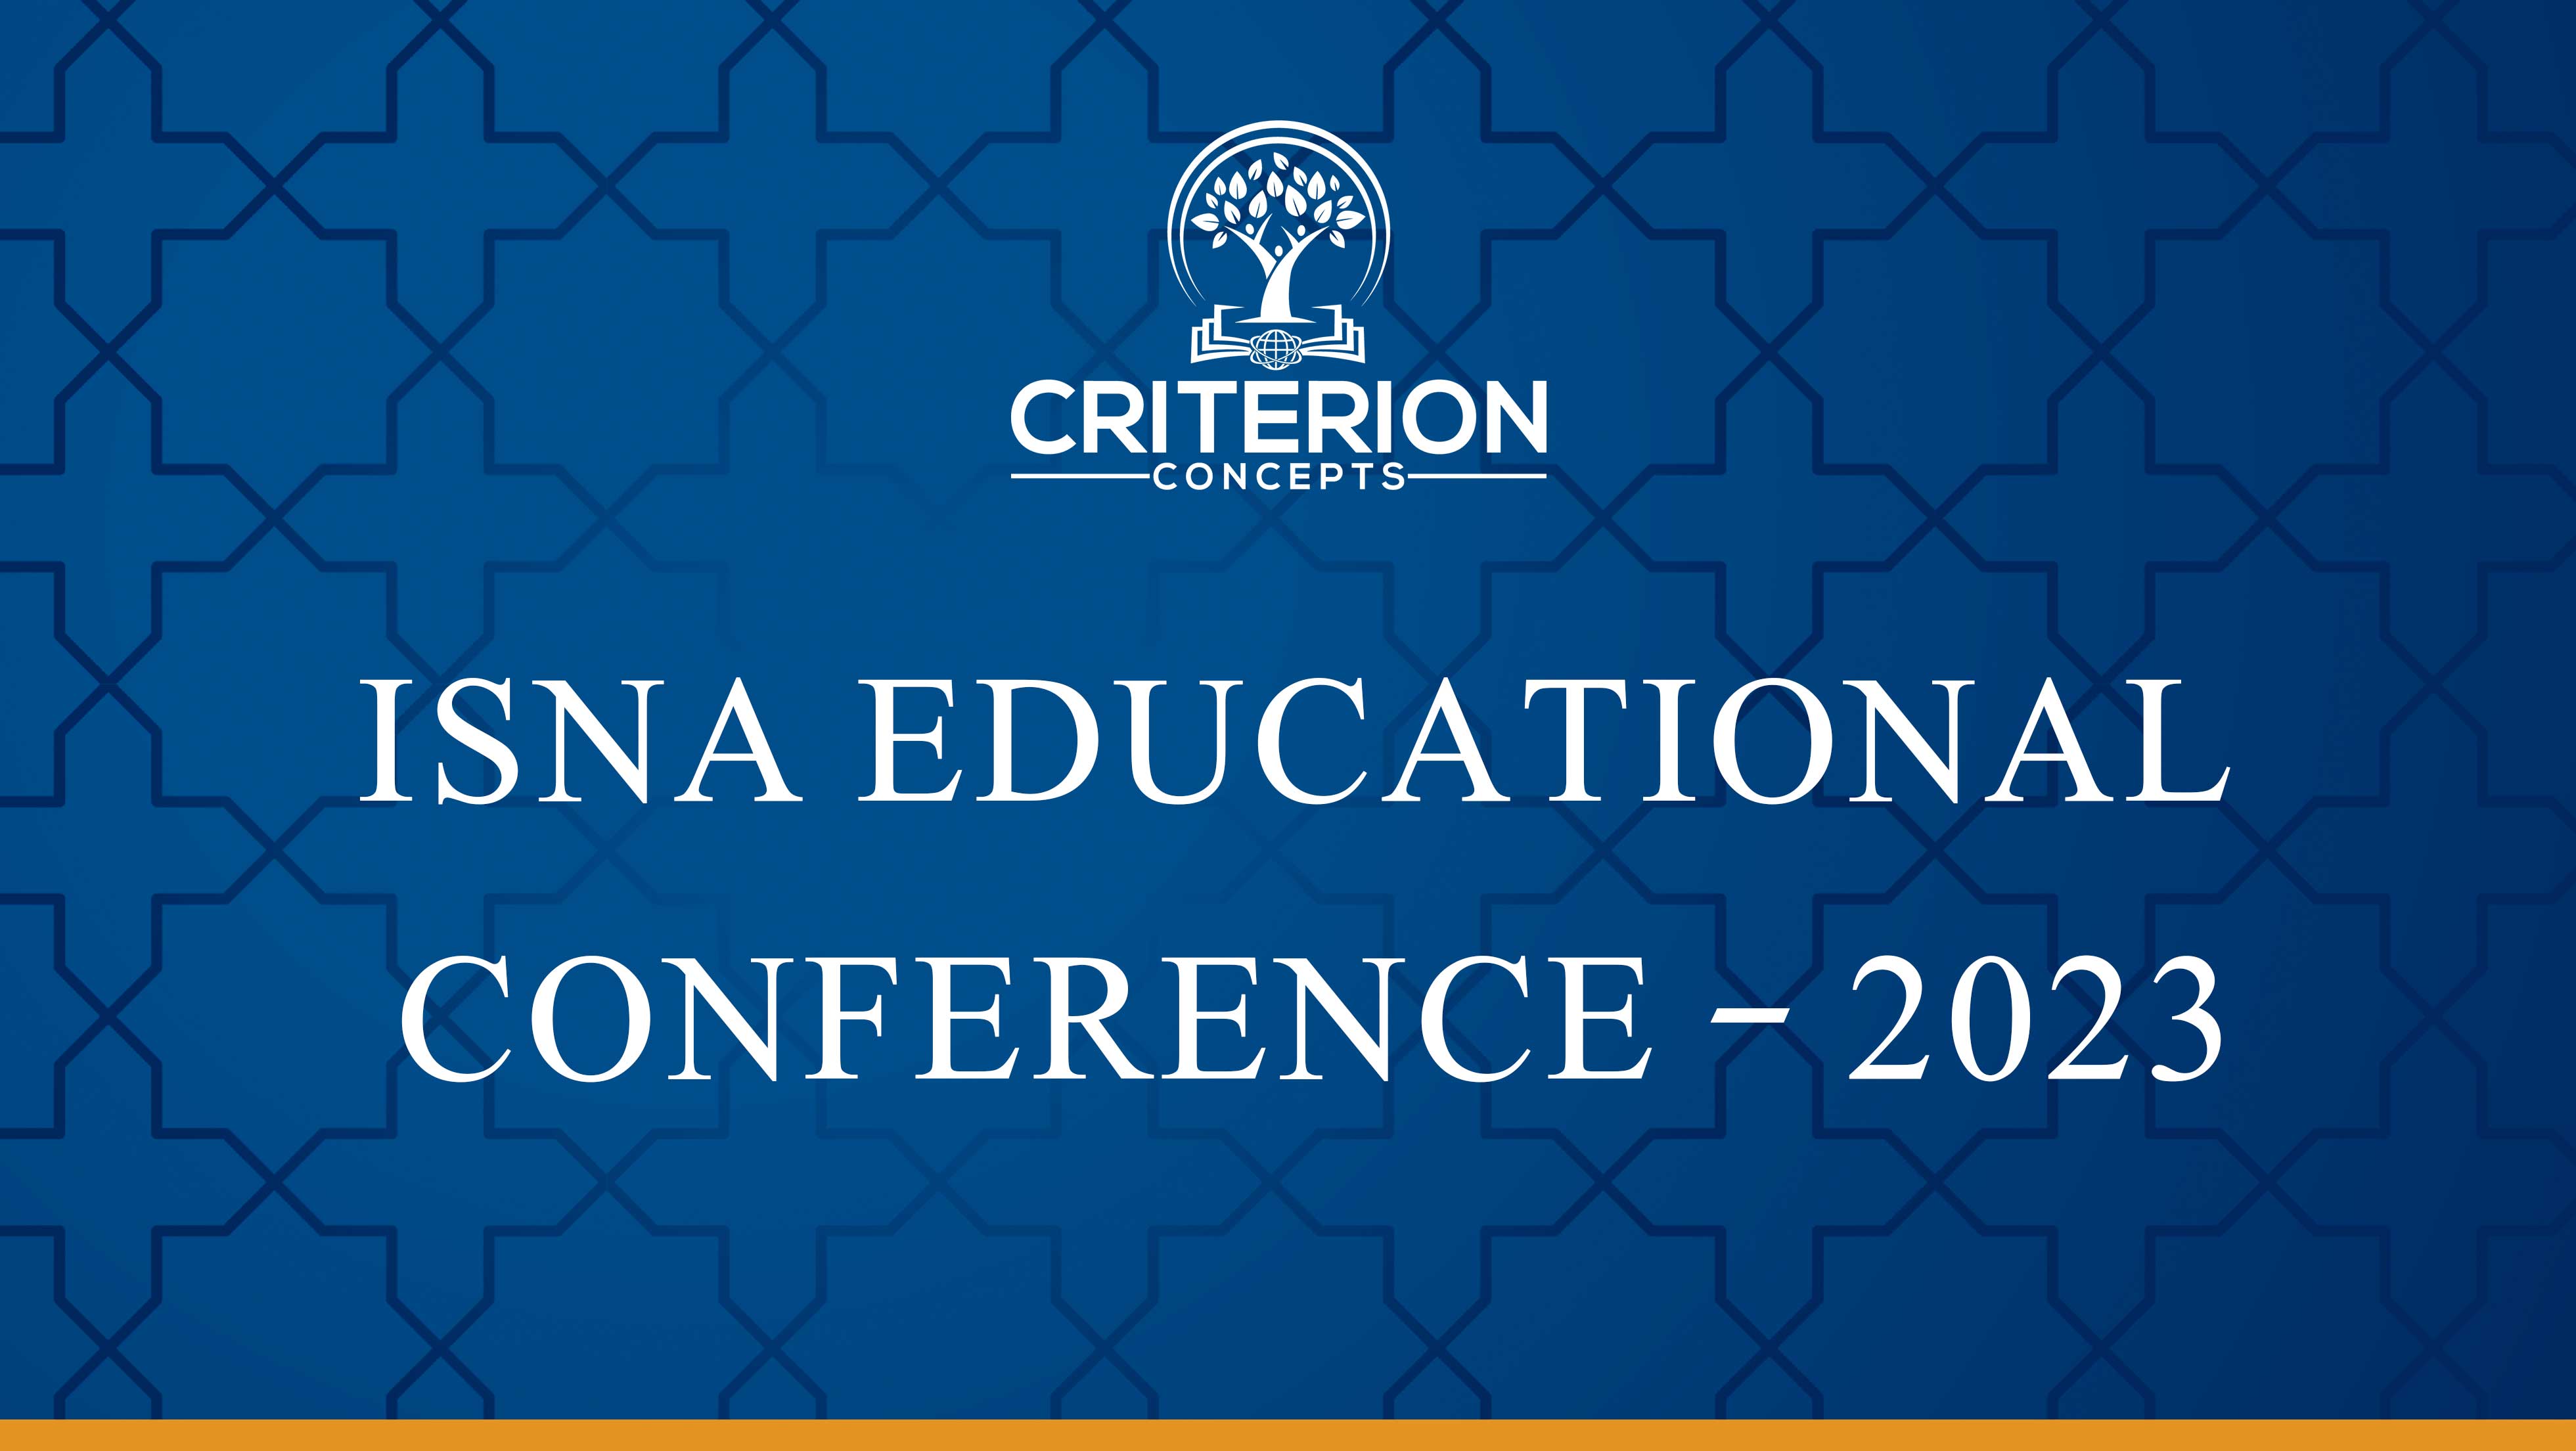 ISNA Educational Conference - 2023